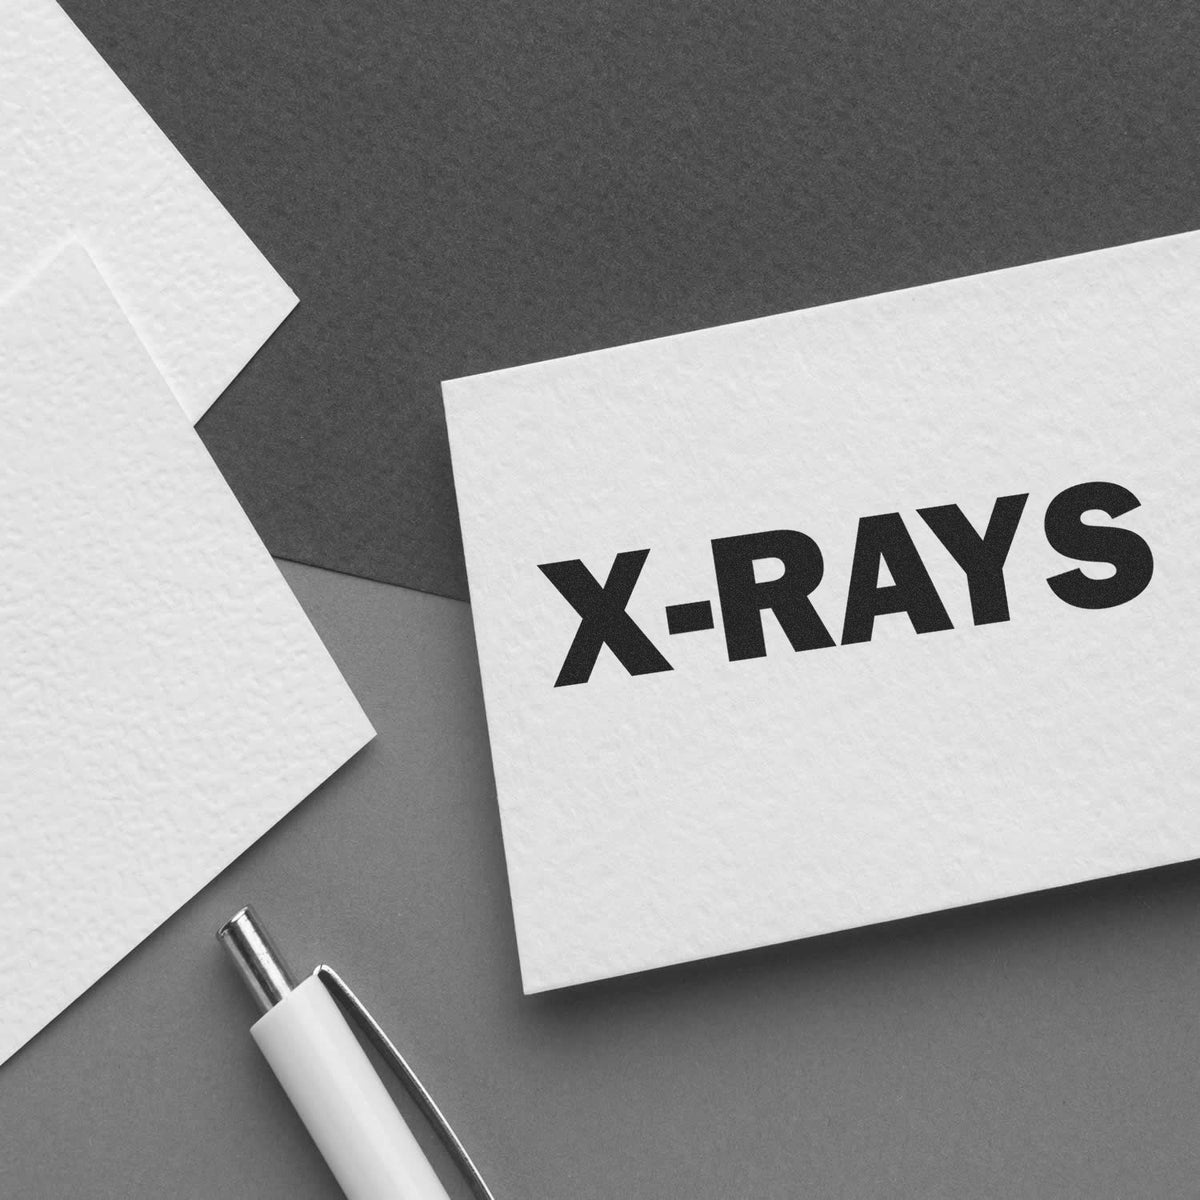 X-Rays Rubber Stamp Lifestyle Photo